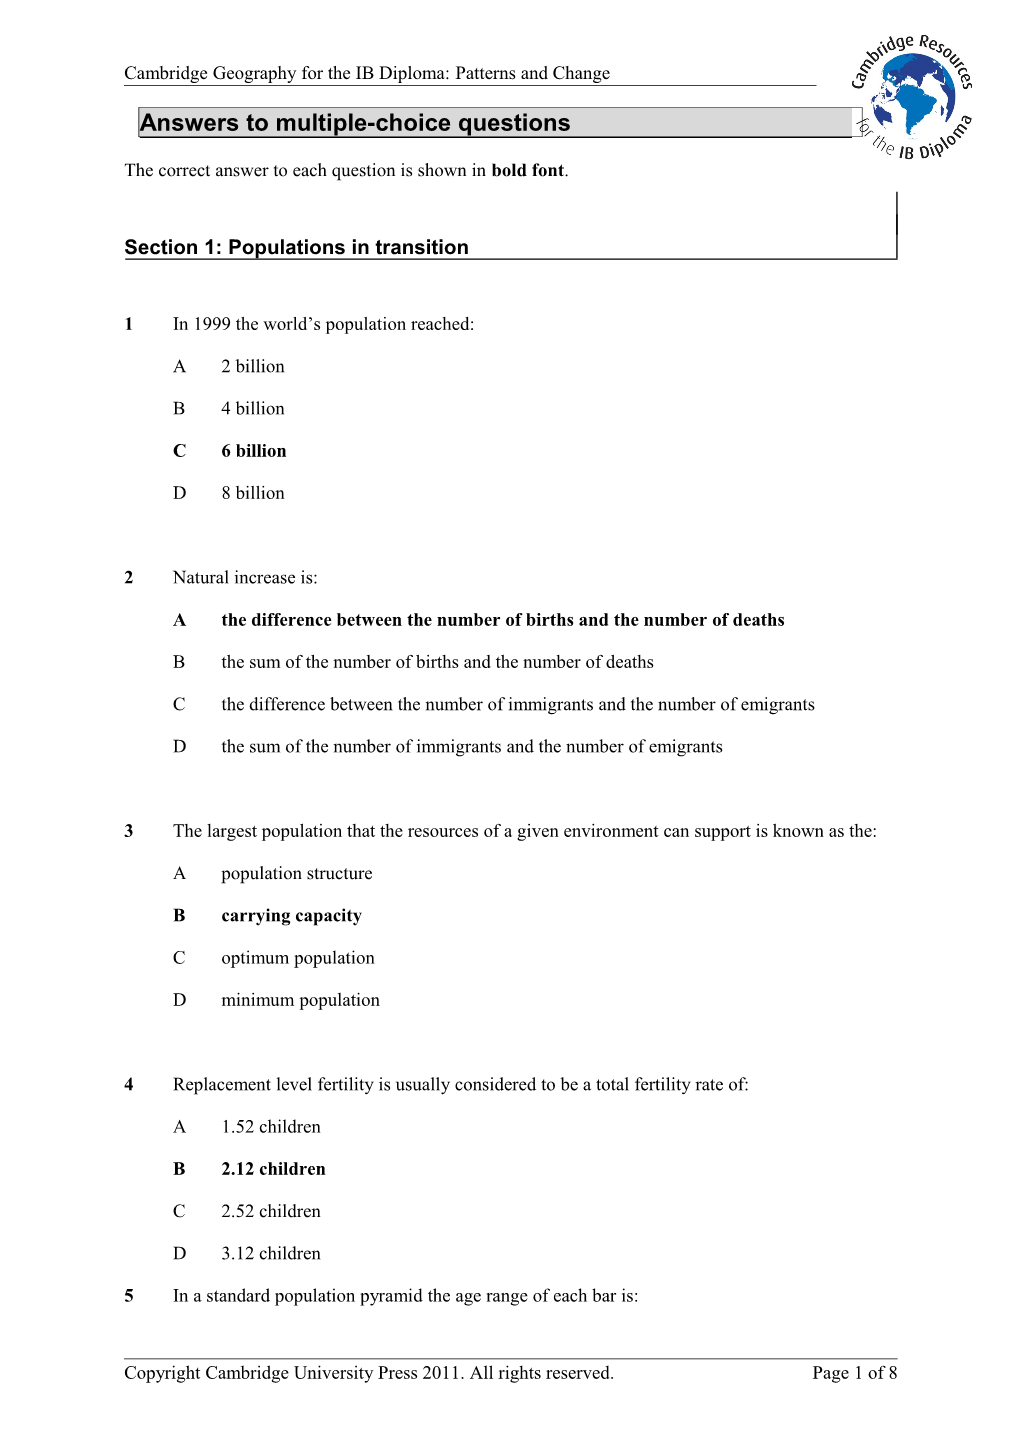 Answers to Multiple-Choice Questions s1